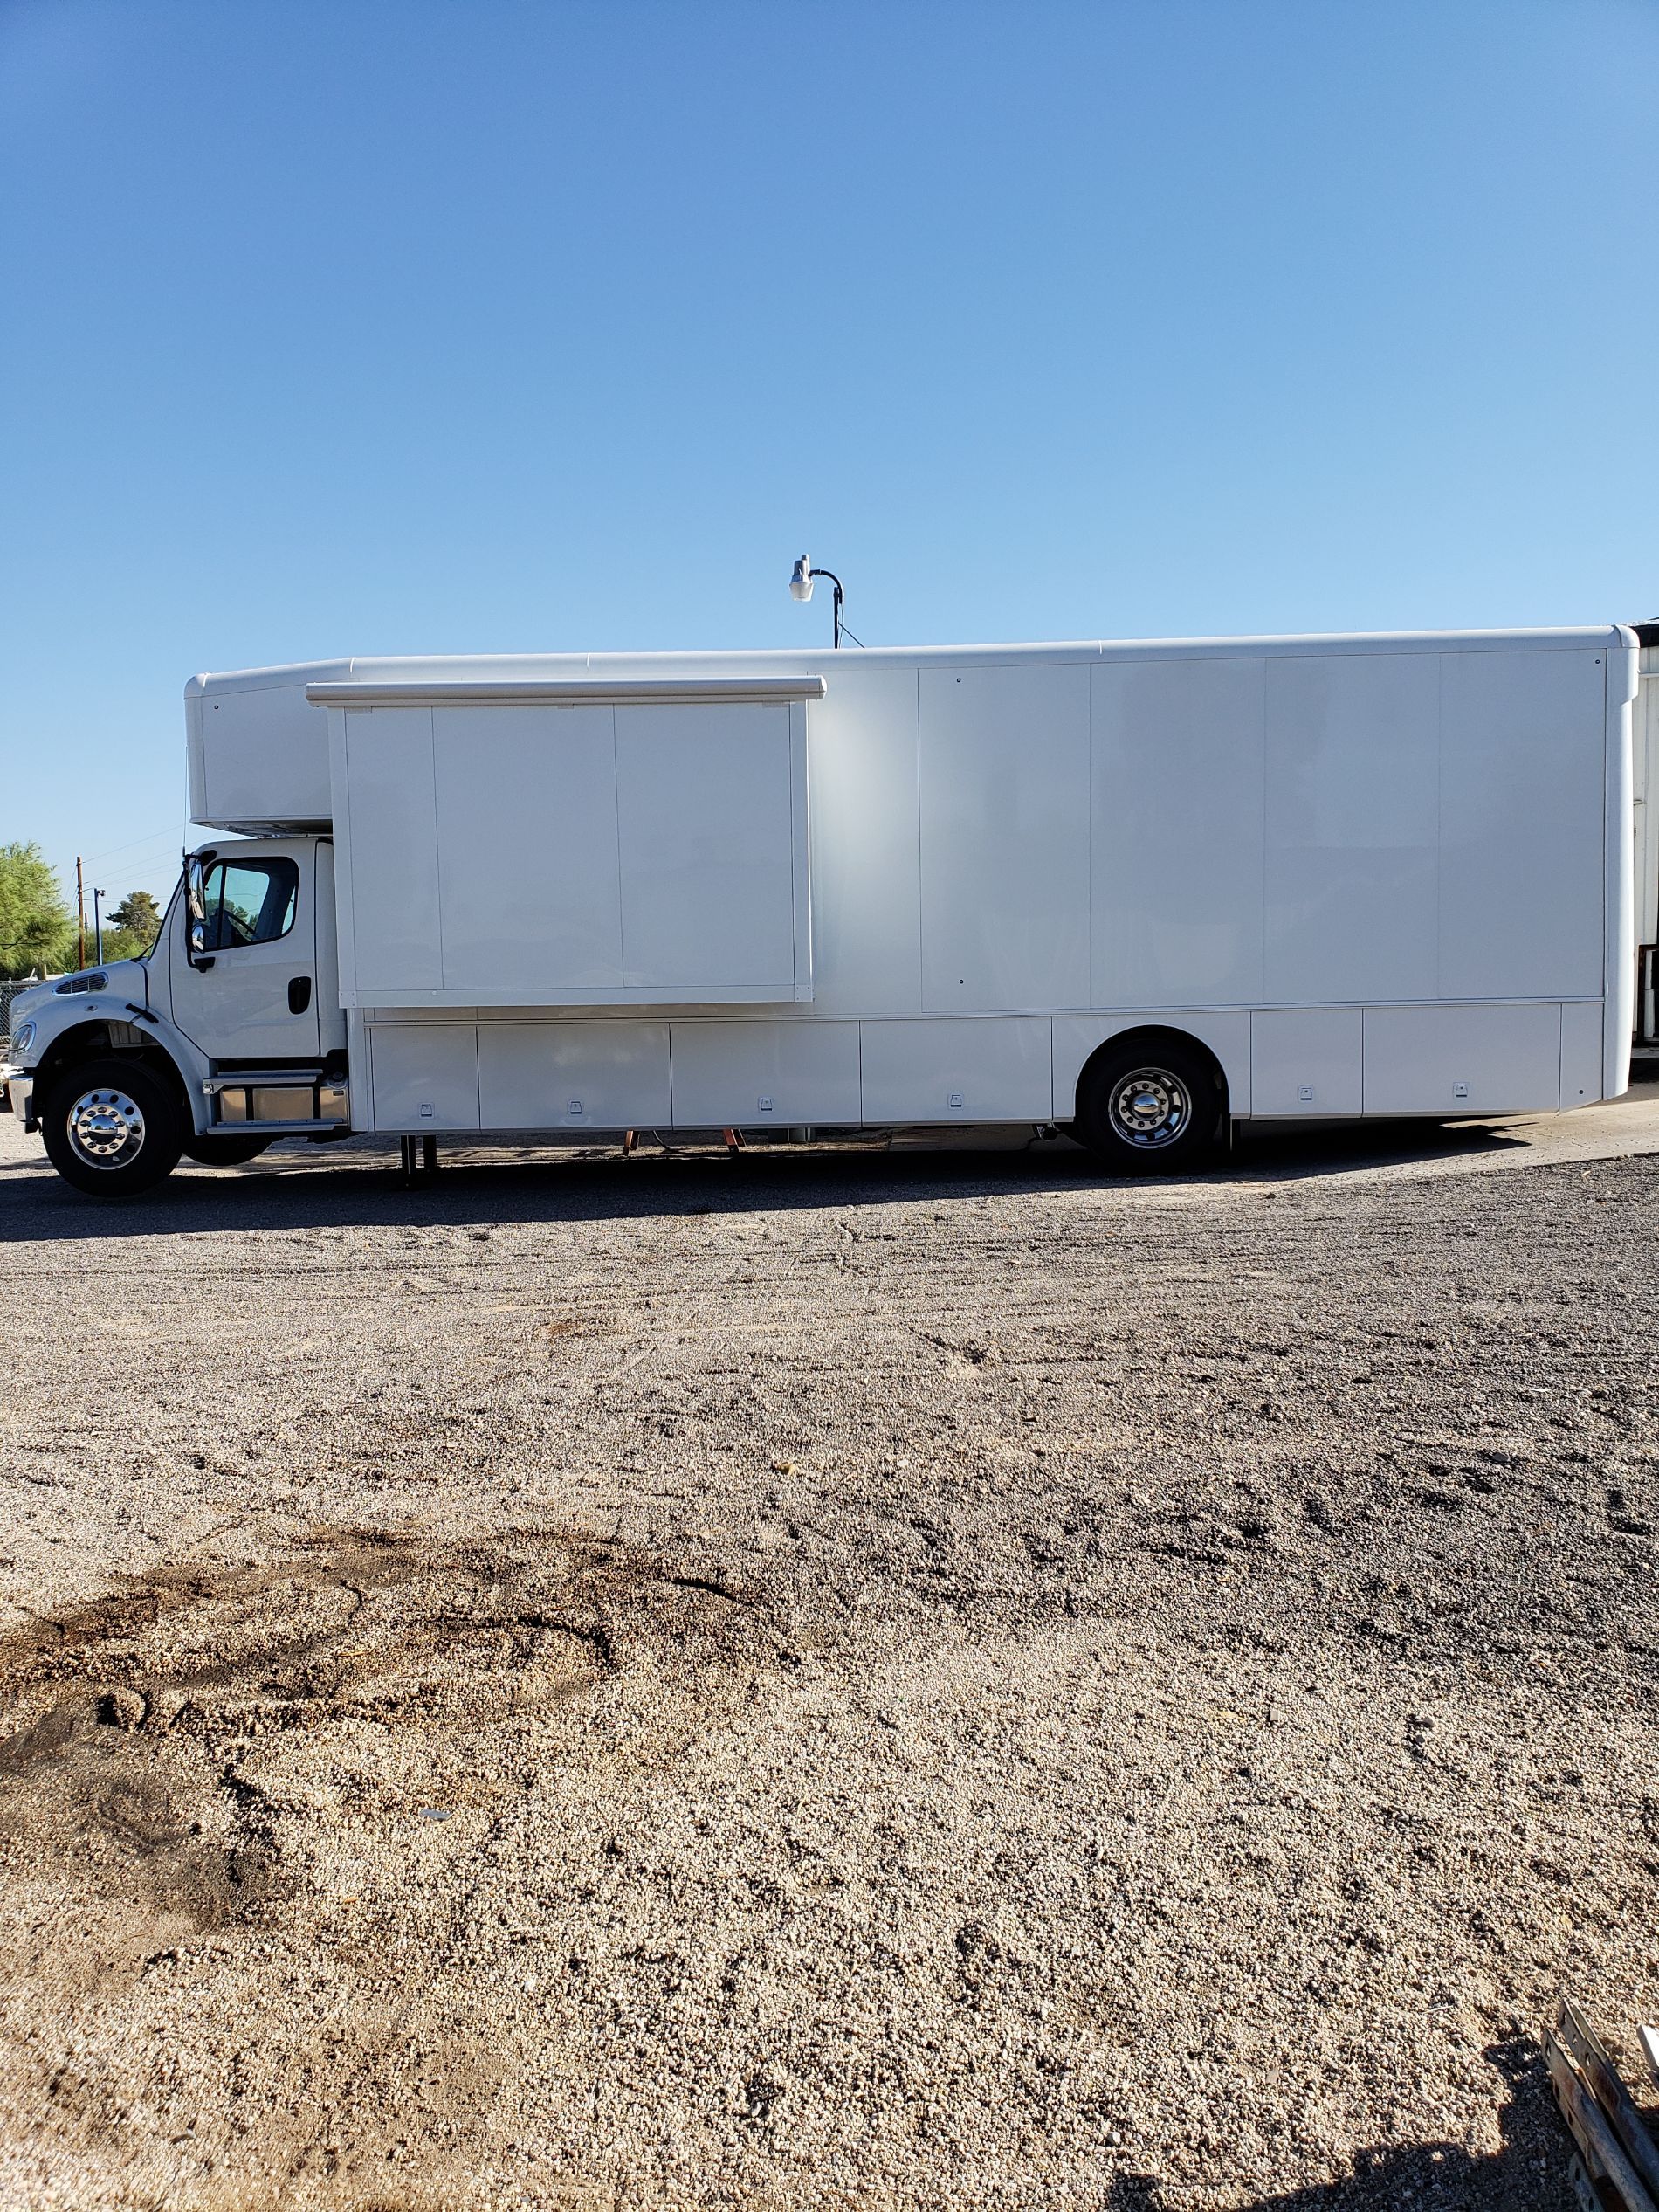 Exterior of mobile medical unit, white